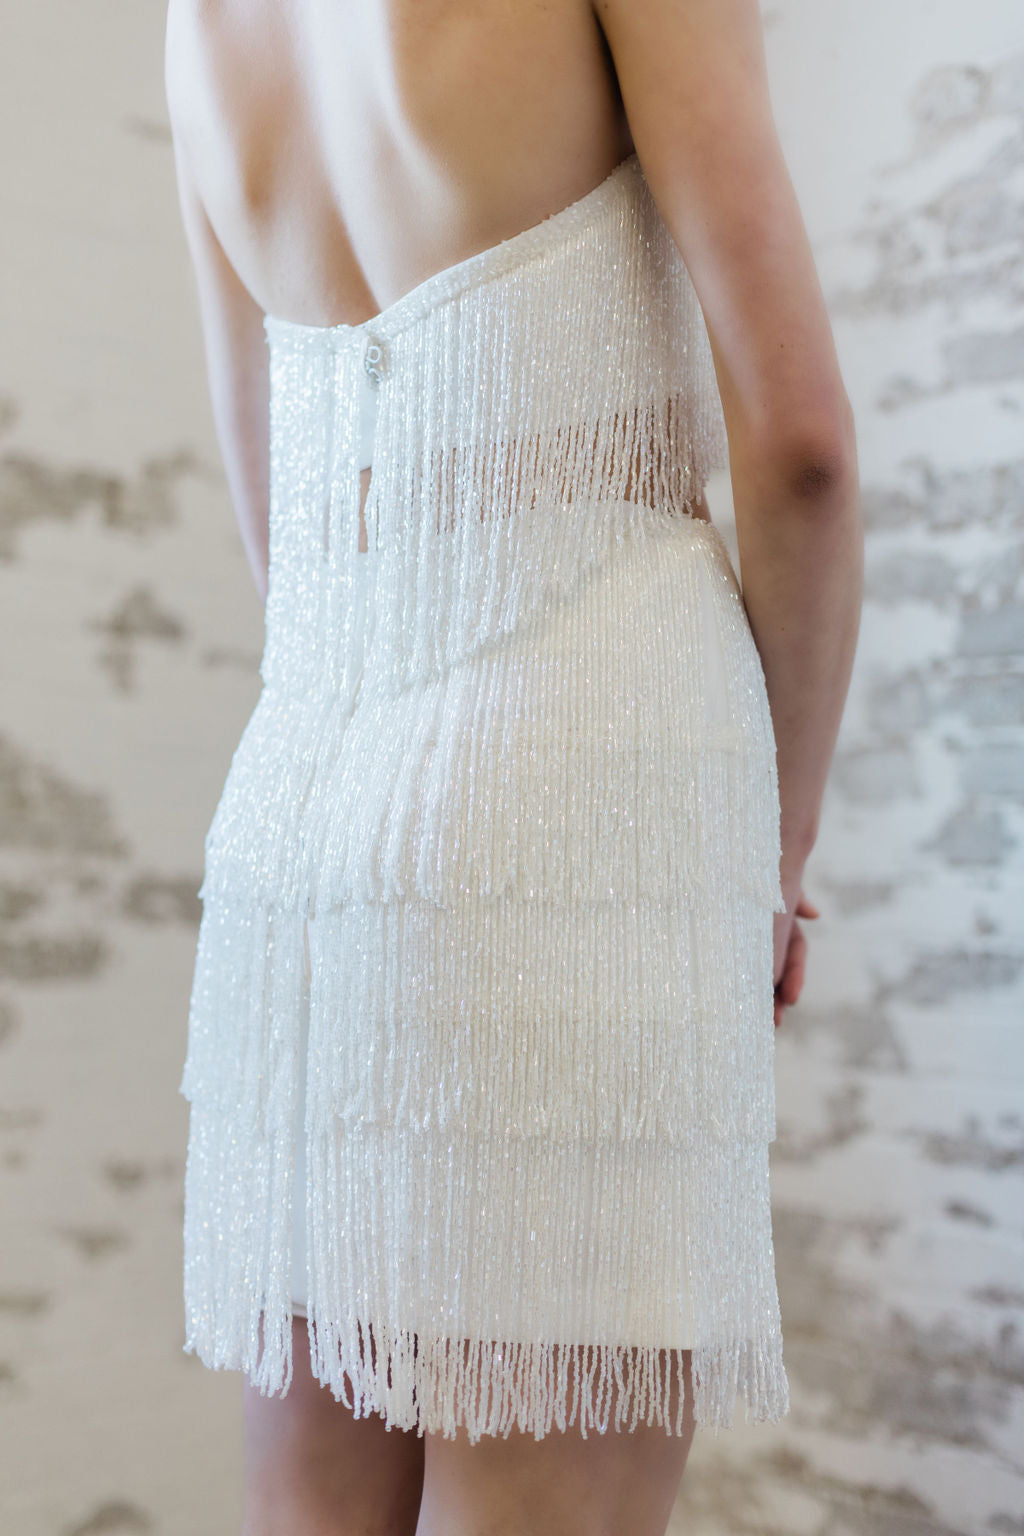 Modern beaded wedding mini skirt. Made in Canada by Catherine Langlois.